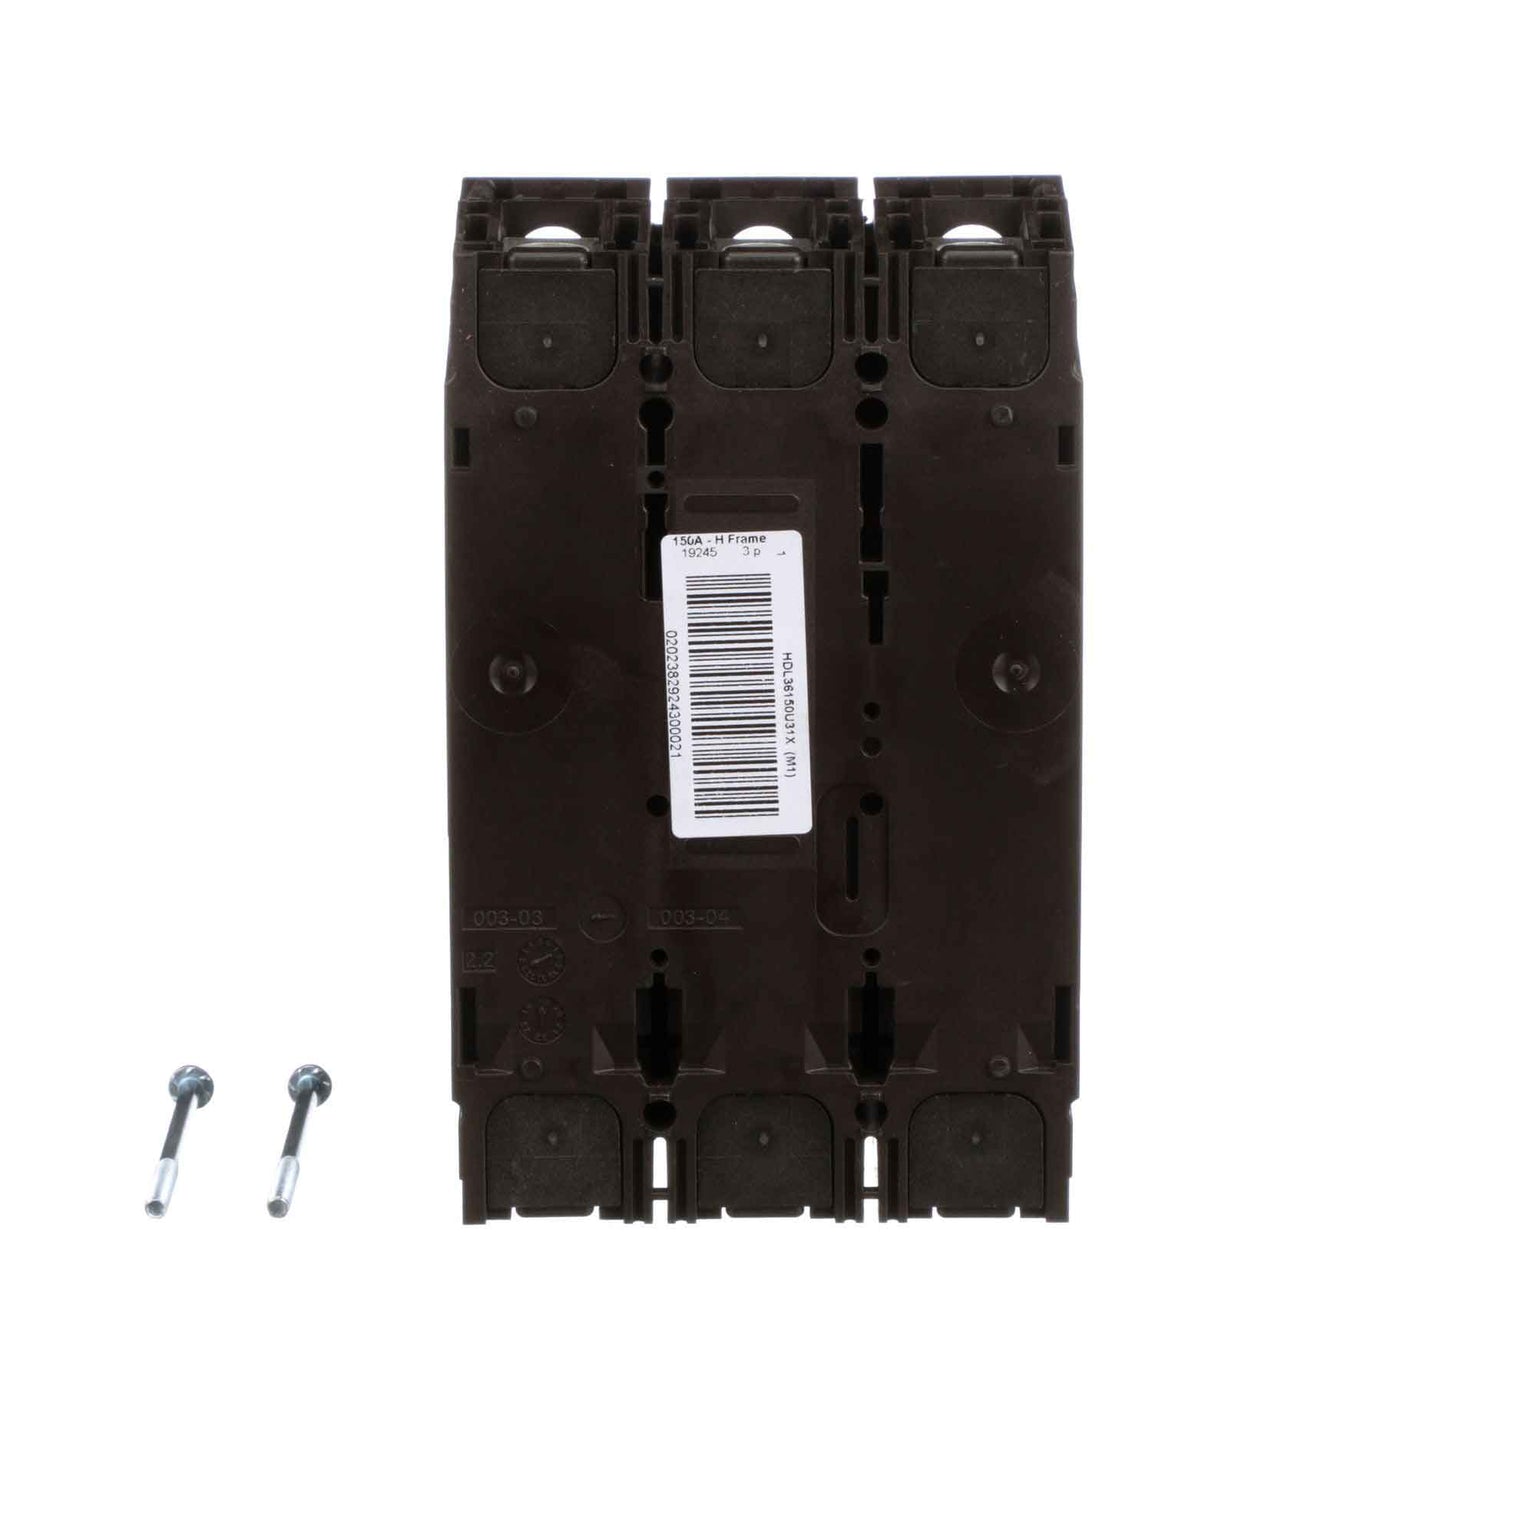 HDL36150U31X - Square D - Molded Case Circuit Breakers